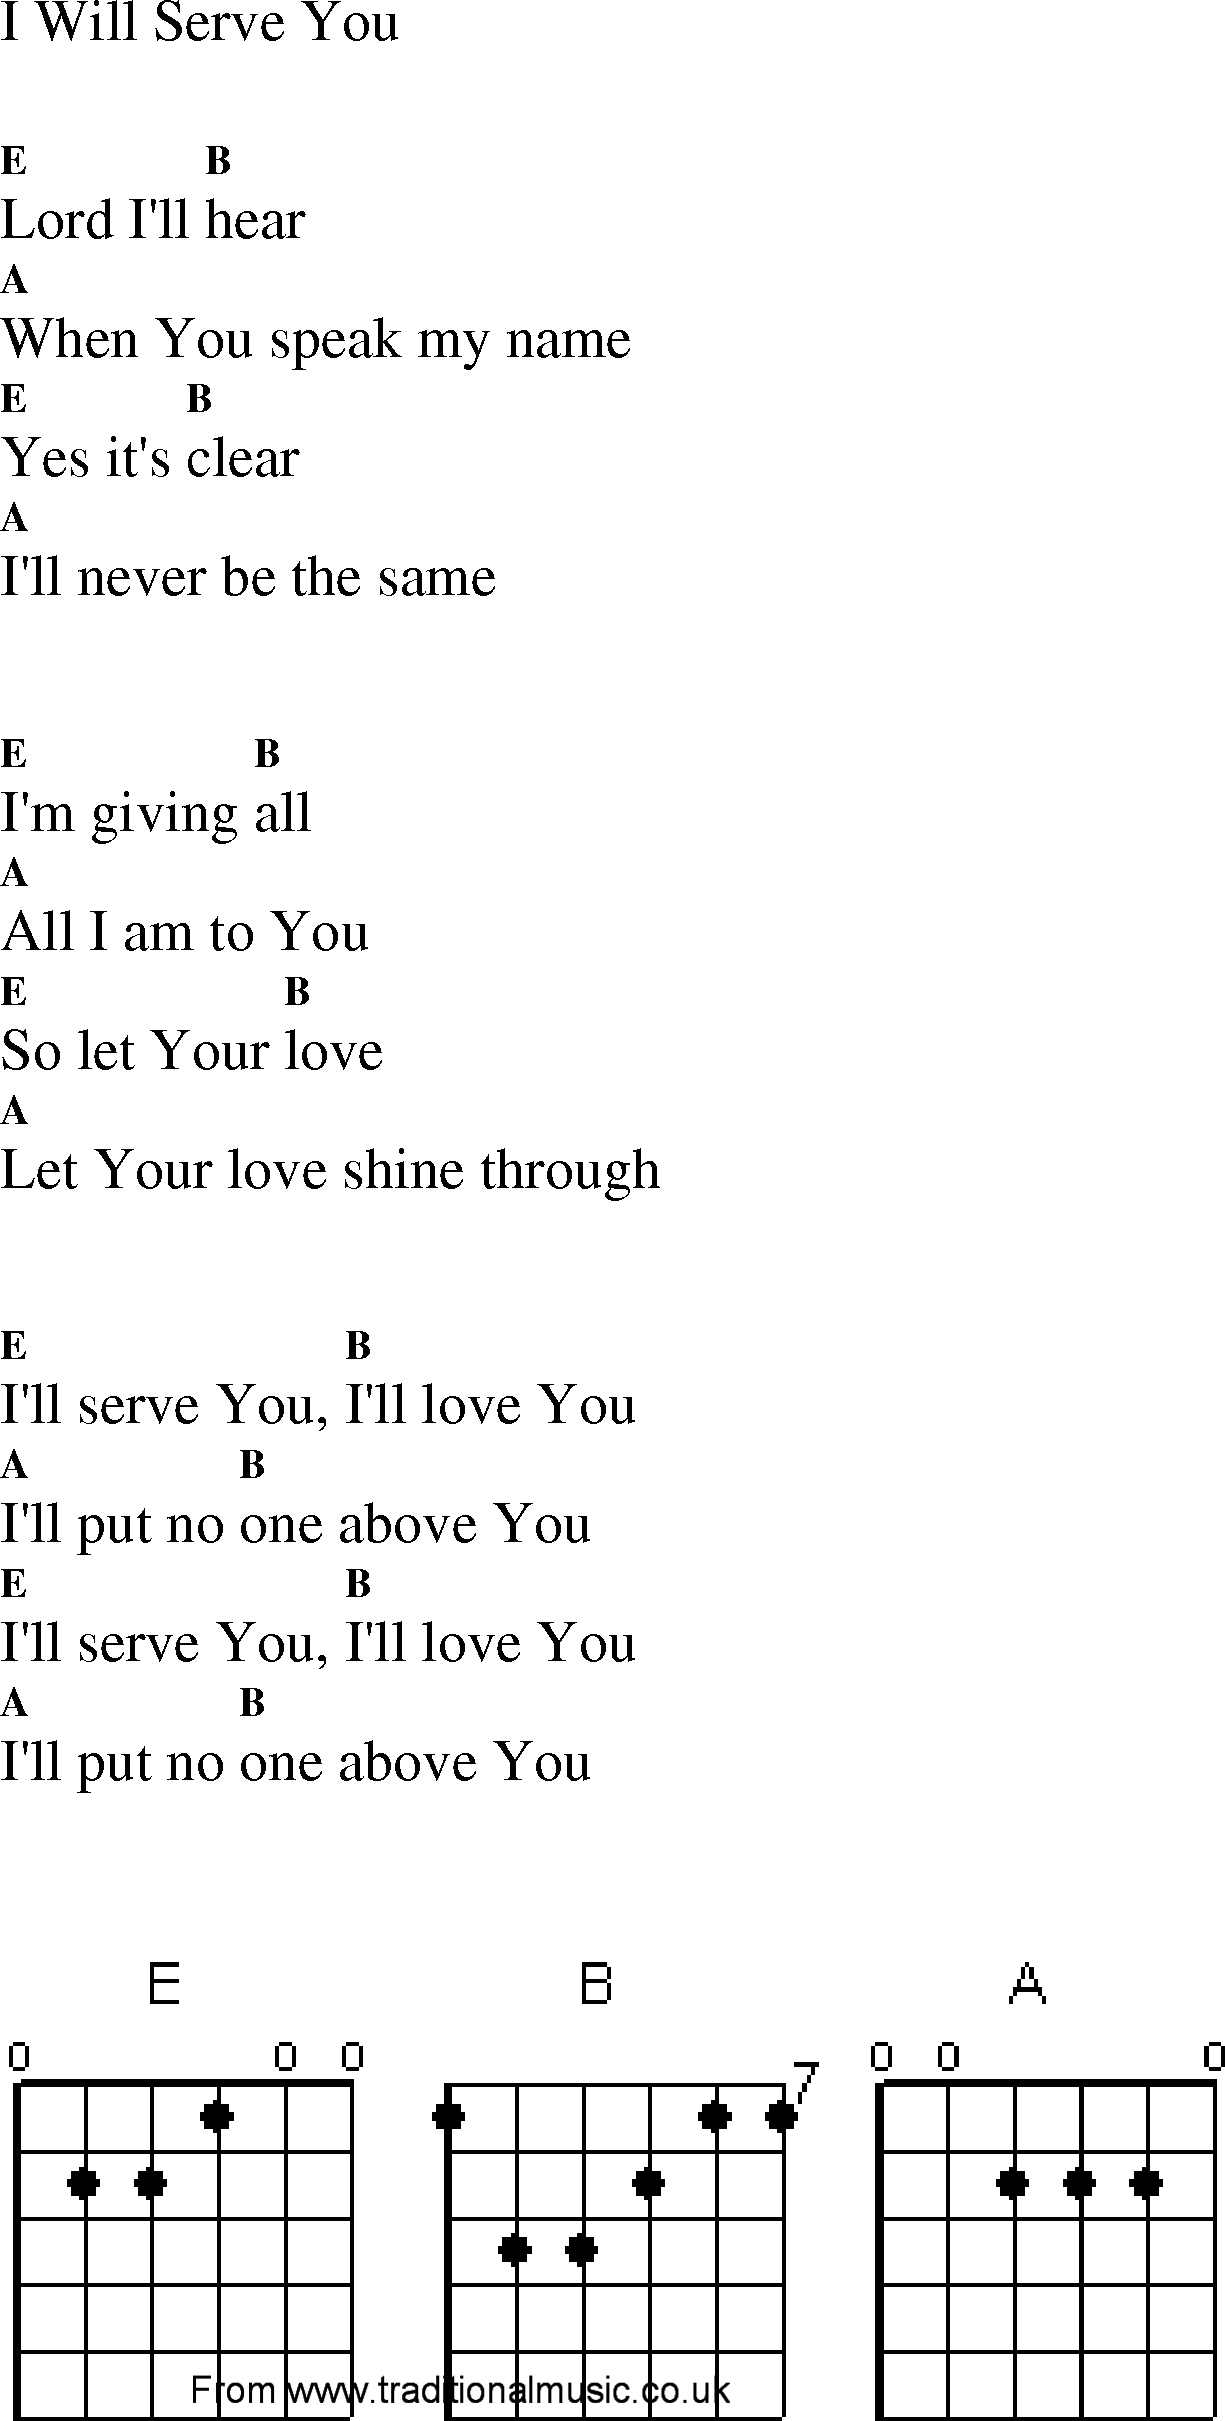 Gospel Song: i_will_serve_you, lyrics and chords.